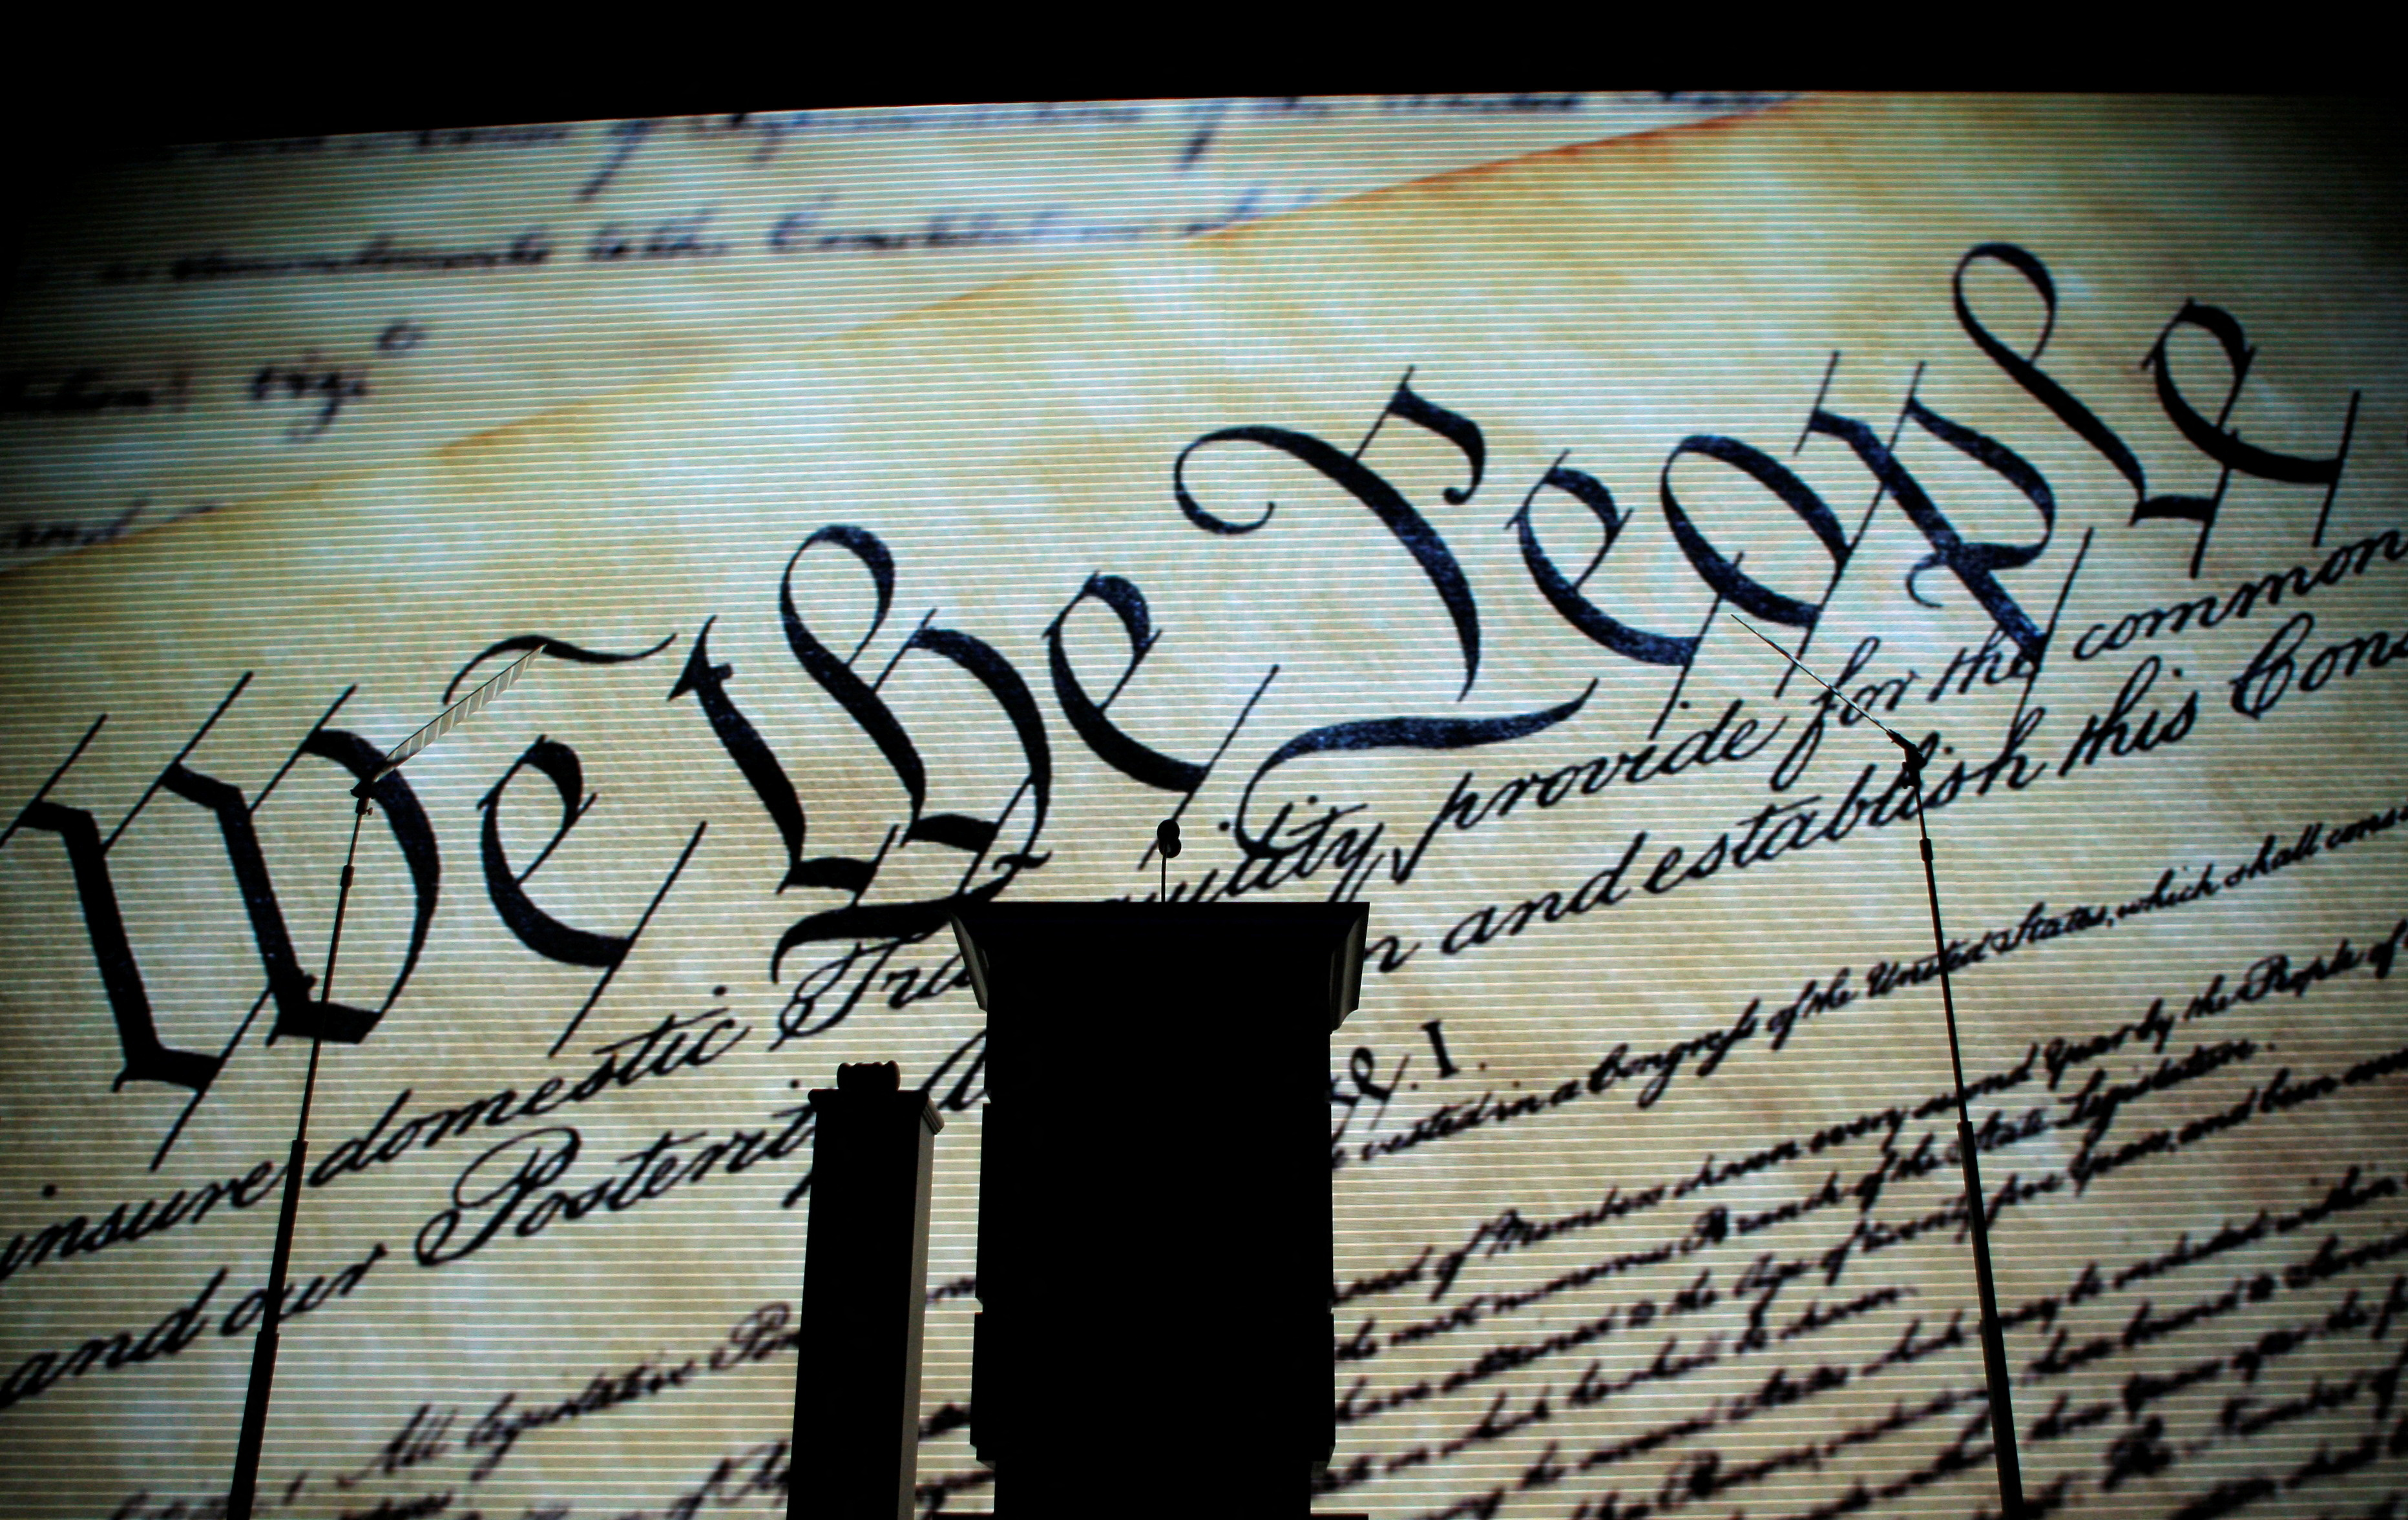 Video presentation shows image of U.S. Constitution at 2008 Republican National Convention in Minnesota